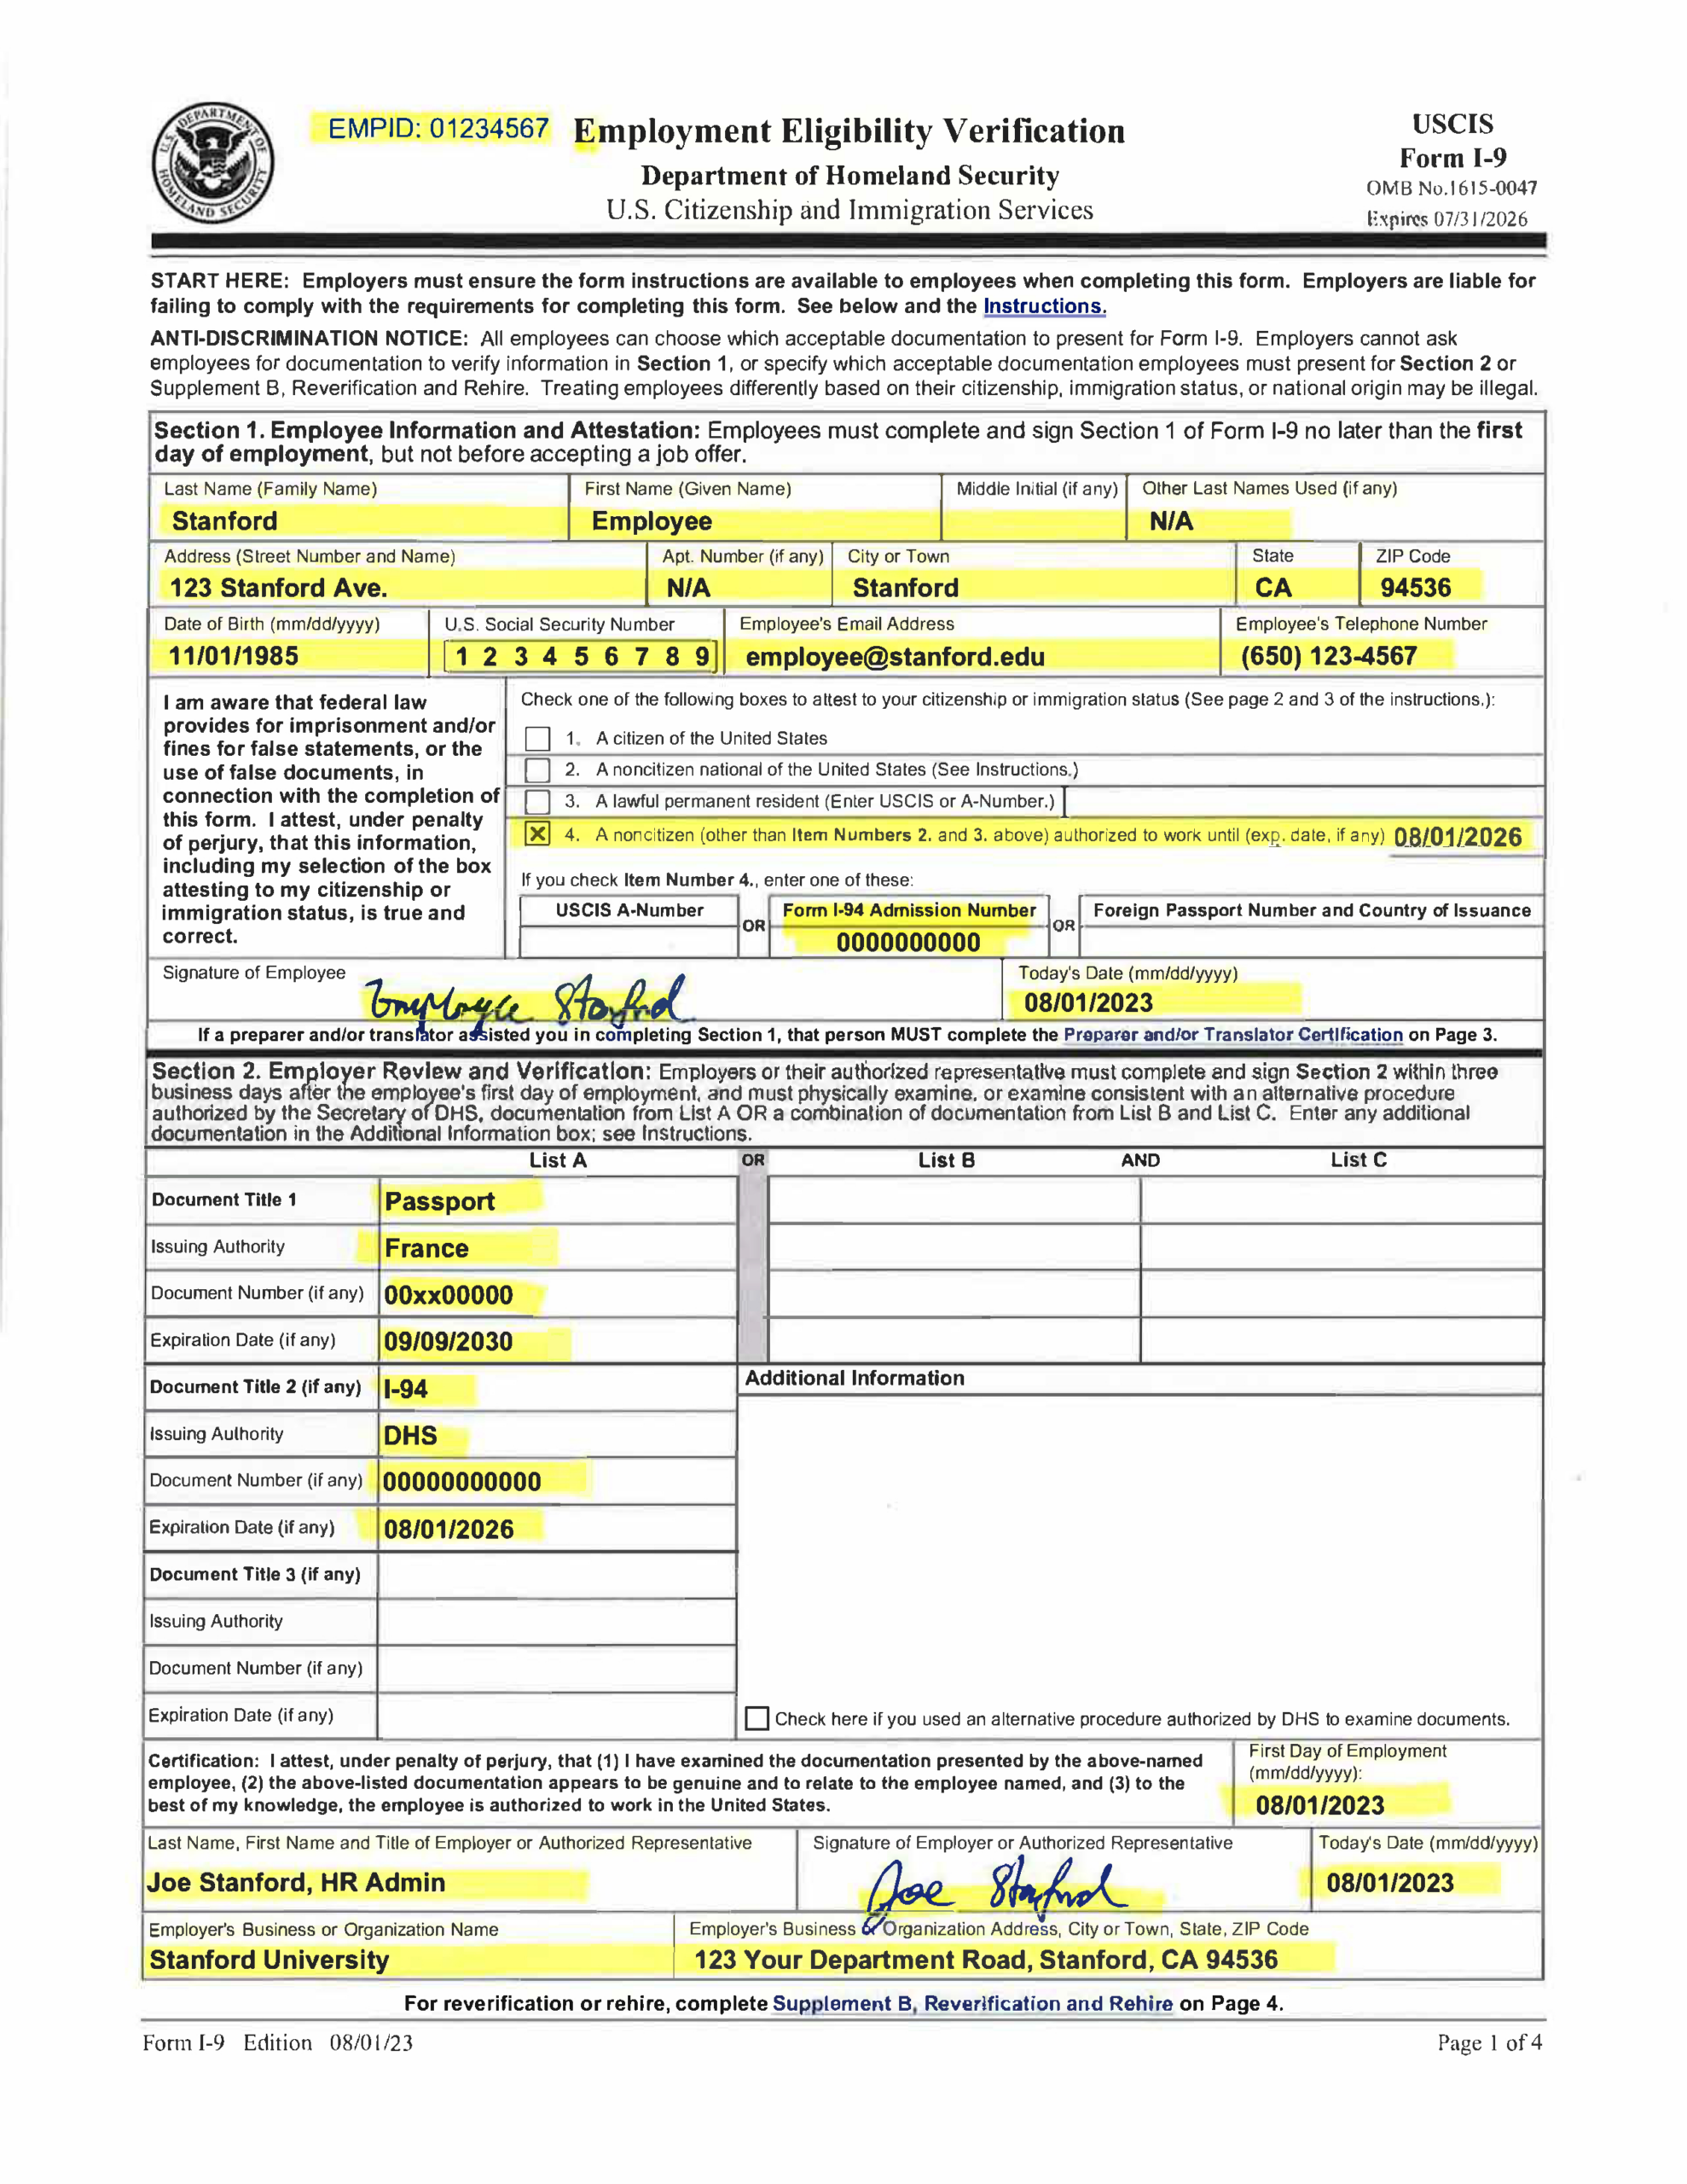 Examples Of Completed Form I-9 For Stanford for What is USCIS I-9 Form